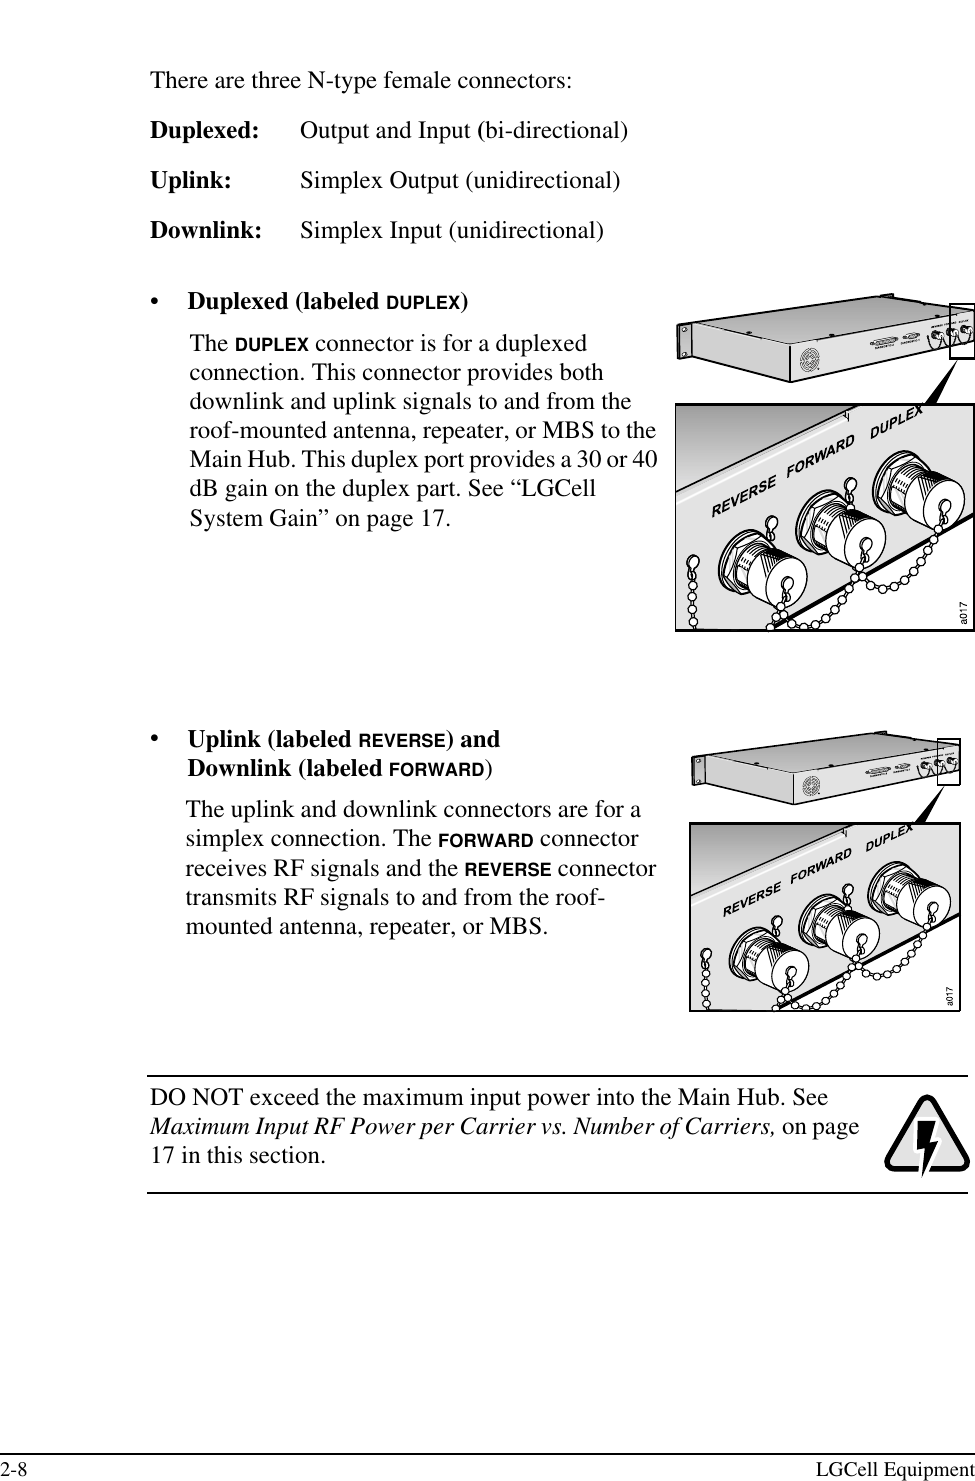 2-8 LGCell EquipmentThere are three N-type female connectors:Duplexed: Output and Input (bi-directional) Uplink: Simplex Output (unidirectional)Downlink: Simplex Input (unidirectional)•Duplexed (labeled DUPLEX)The DUPLEX connector is for a duplexed connection. This connector provides both downlink and uplink signals to and from the roof-mounted antenna, repeater, or MBS to the Main Hub. This duplex port provides a 30 or 40 dB gain on the duplex part. See “LGCell System Gain” on page 17.•Uplink (labeled REVERSE) and Downlink (labeled FORWARD)The uplink and downlink connectors are for a simplex connection. The FORWARD connector receives RF signals and the REVERSE connector transmits RF signals to and from the roof-mounted antenna, repeater, or MBS. DO NOT exceed the maximum input power into the Main Hub. See Maximum Input RF Power per Carrier vs. Number of Carriers, on page 17 in this section.